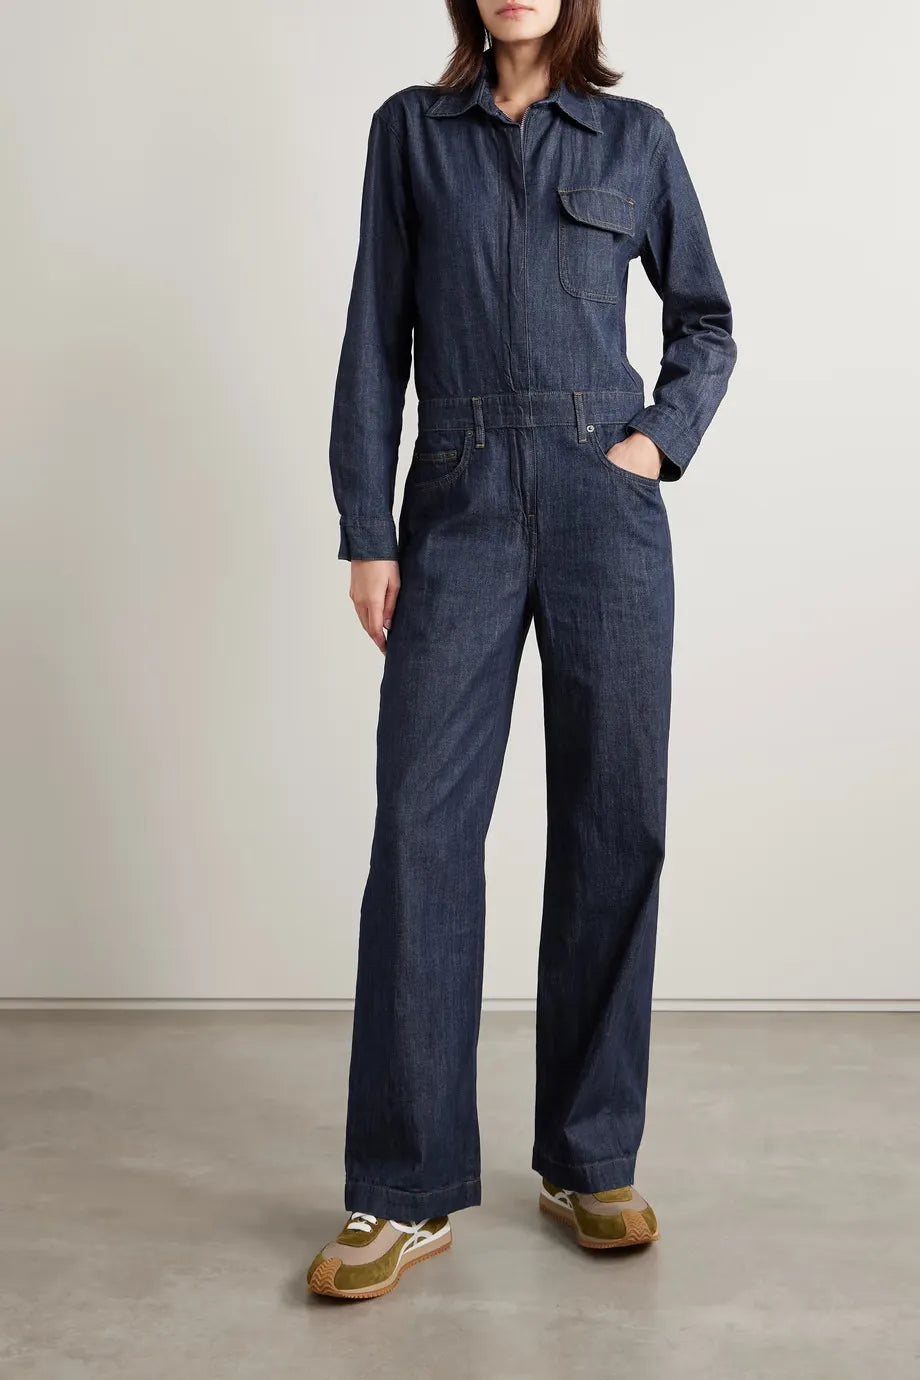 WhoWhatWear Feature | Rivet Utility is one of WhoWhatWear's favorite jumpsuits to buy right now